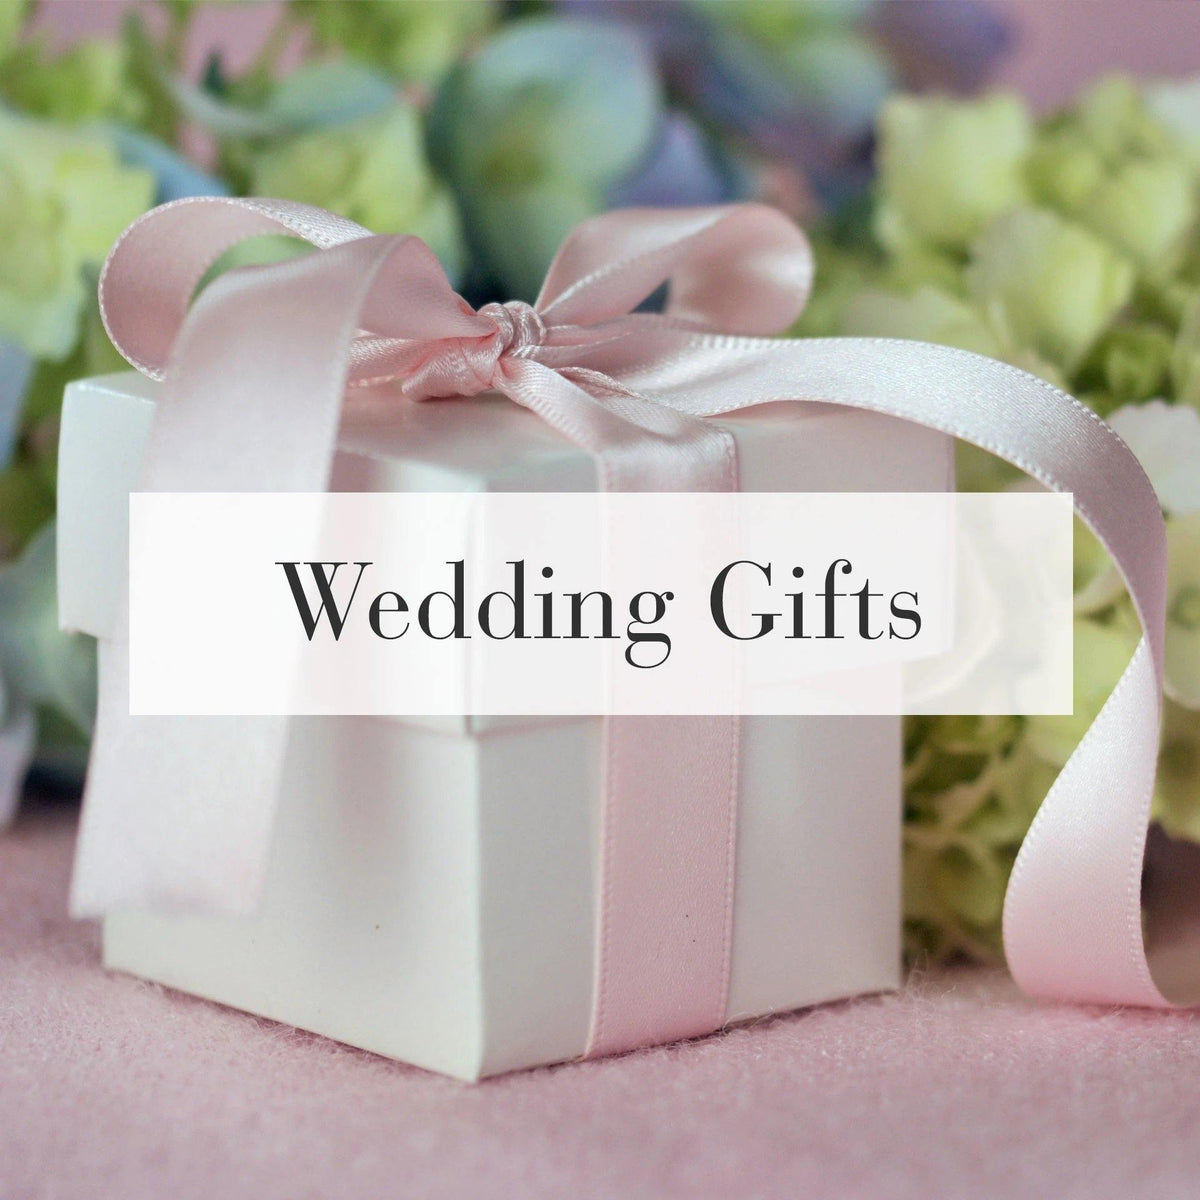 Wedding Gifts - Robes4you